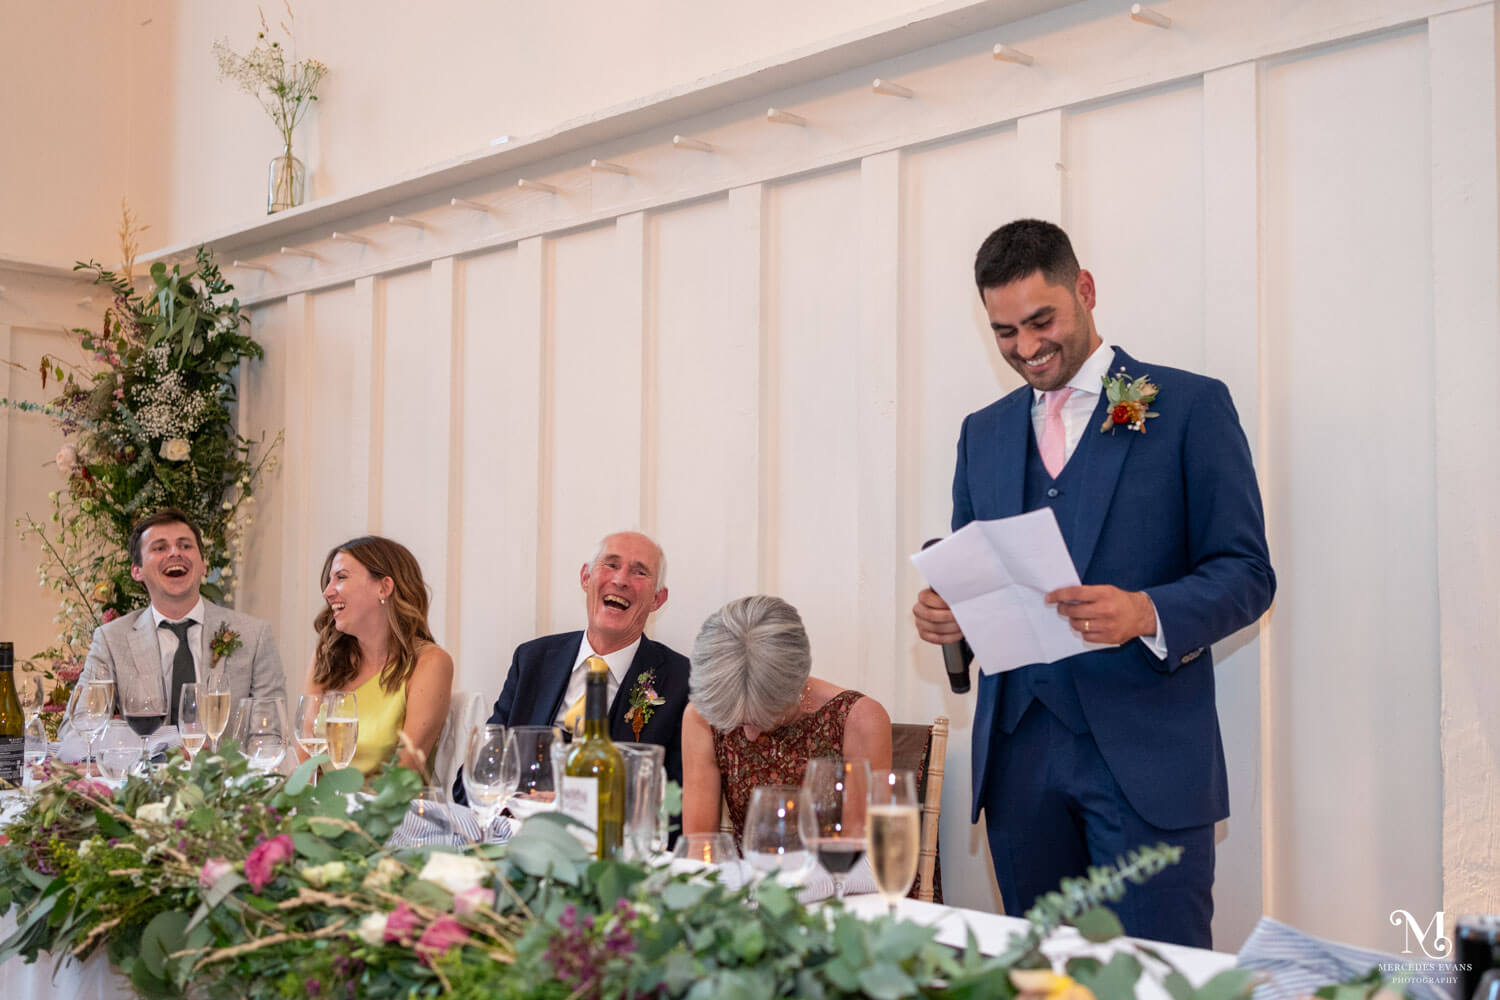 the groom stands making his speech, all around him are howling with laughter